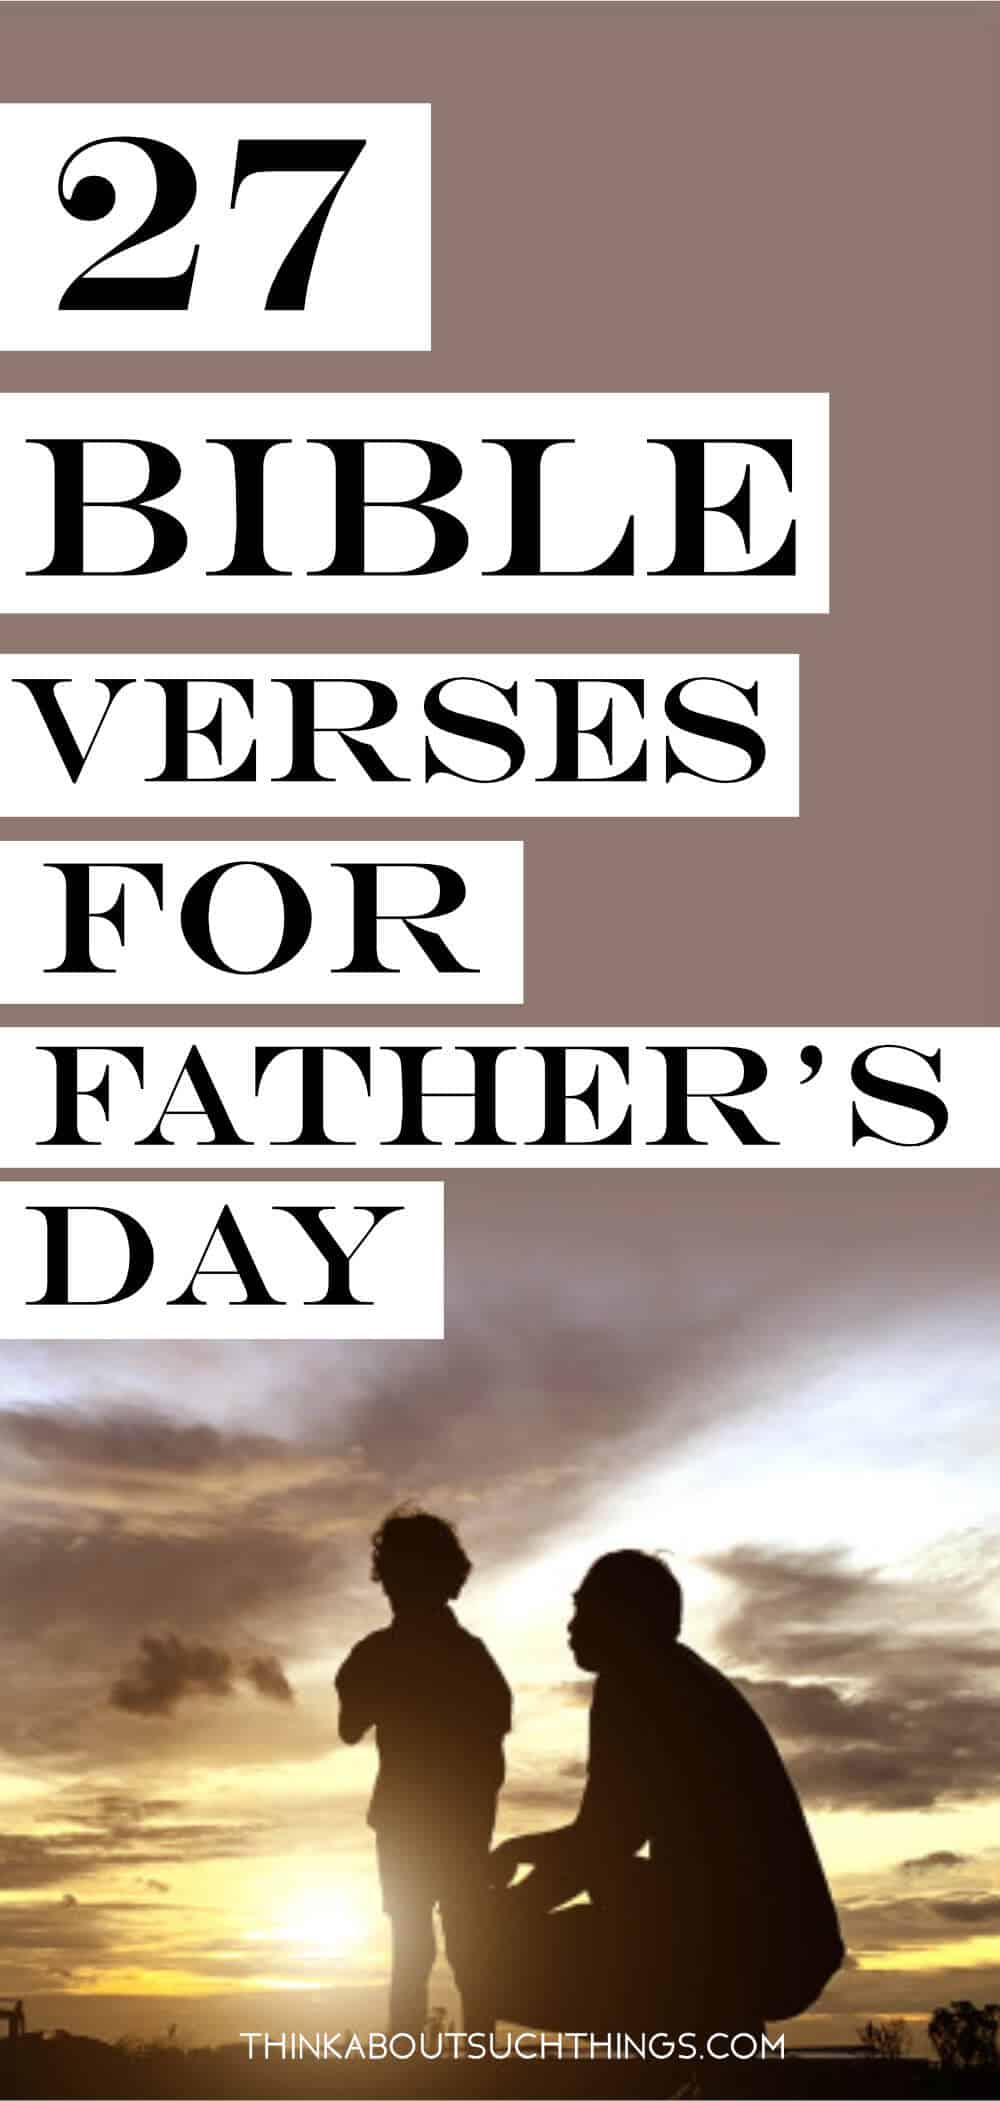 27 Father's Day Bible Verses To Bless Dad [With Images] Think About